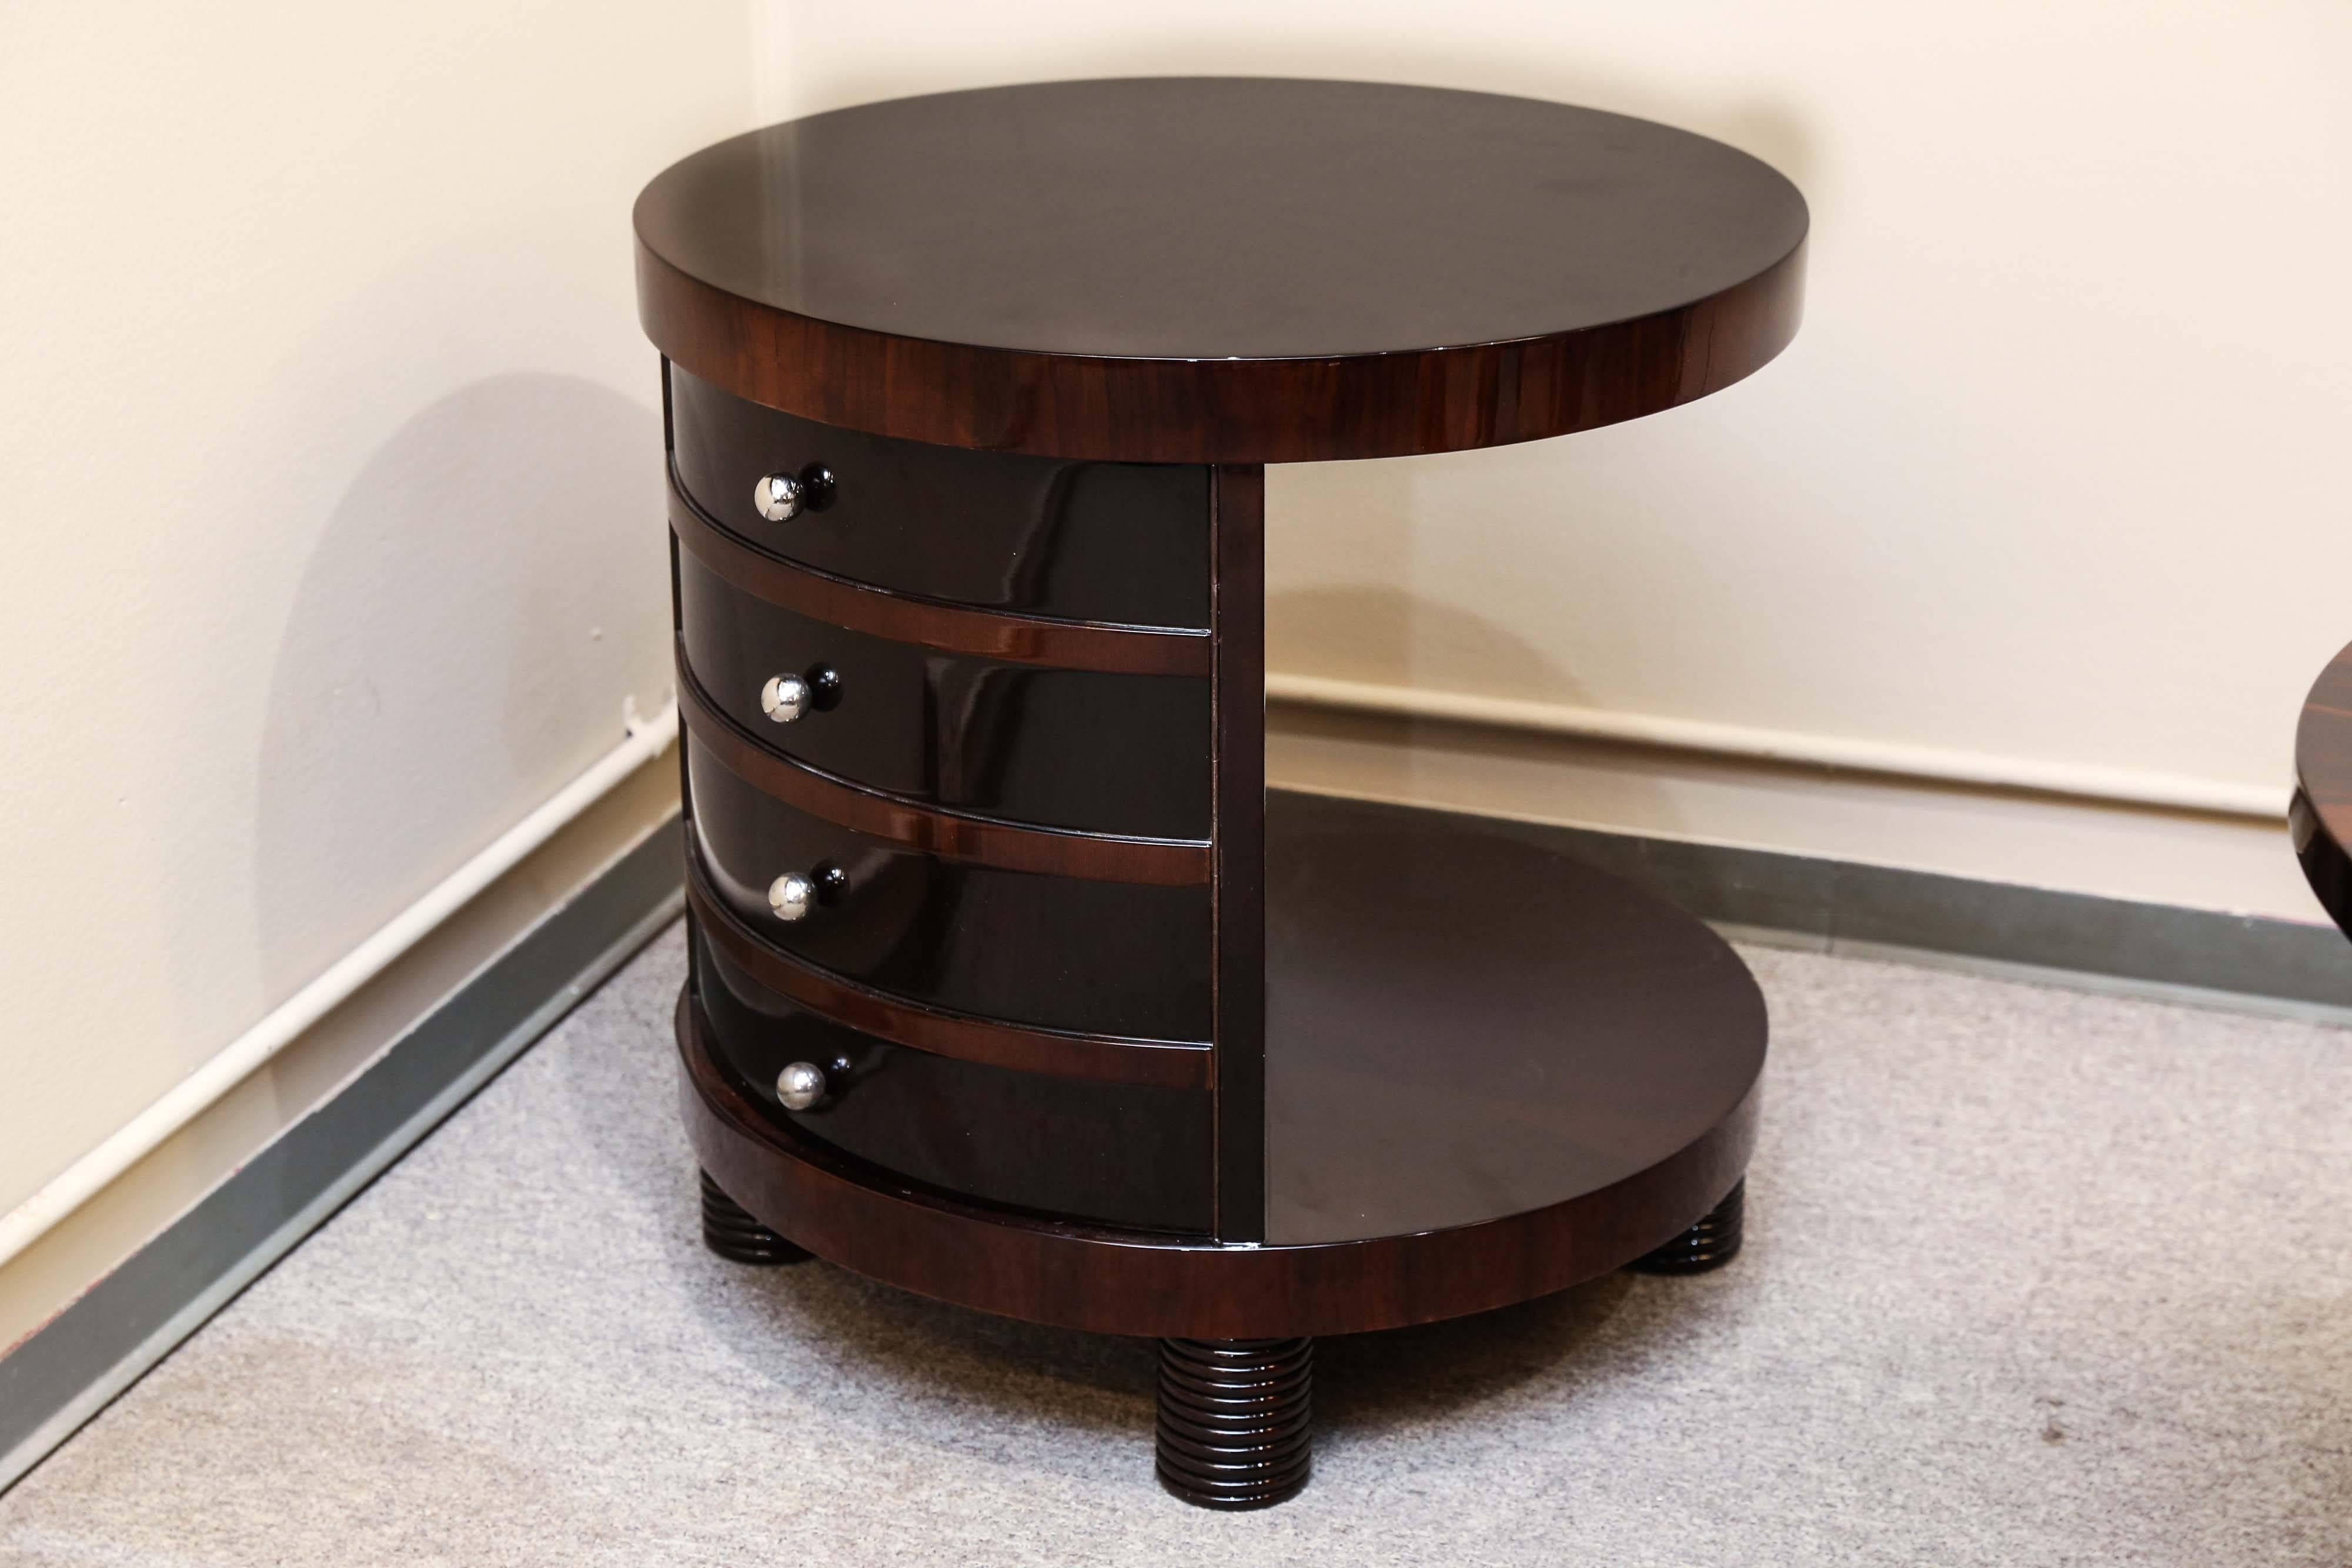 The round top and the bottom of the side table is attached to each other by the four spacious drawers, that are placed one on top of each other. Each of the drawers have small round handle. The bottom panel is elevated by four “cylinder shaped”